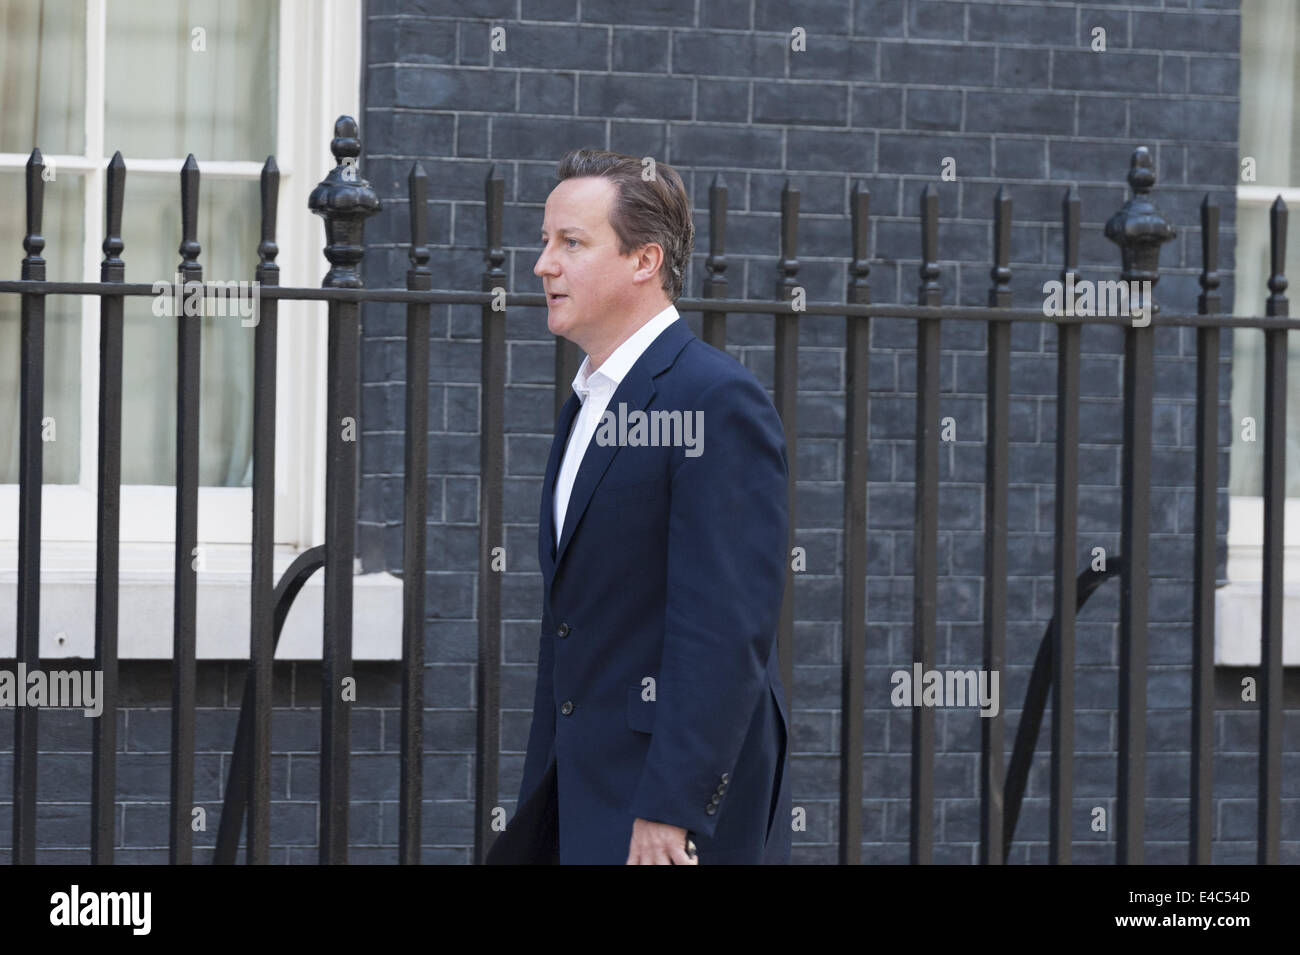 London, UK. 8th July, 2014. UK government ministers attend 10 Downing Street in London for the weekly Cabinet Meeting. Pictured: DAVID CAMERON MP - Prime Minister. © Lee Thomas/ZUMA Wire/Alamy Live News Stock Photo